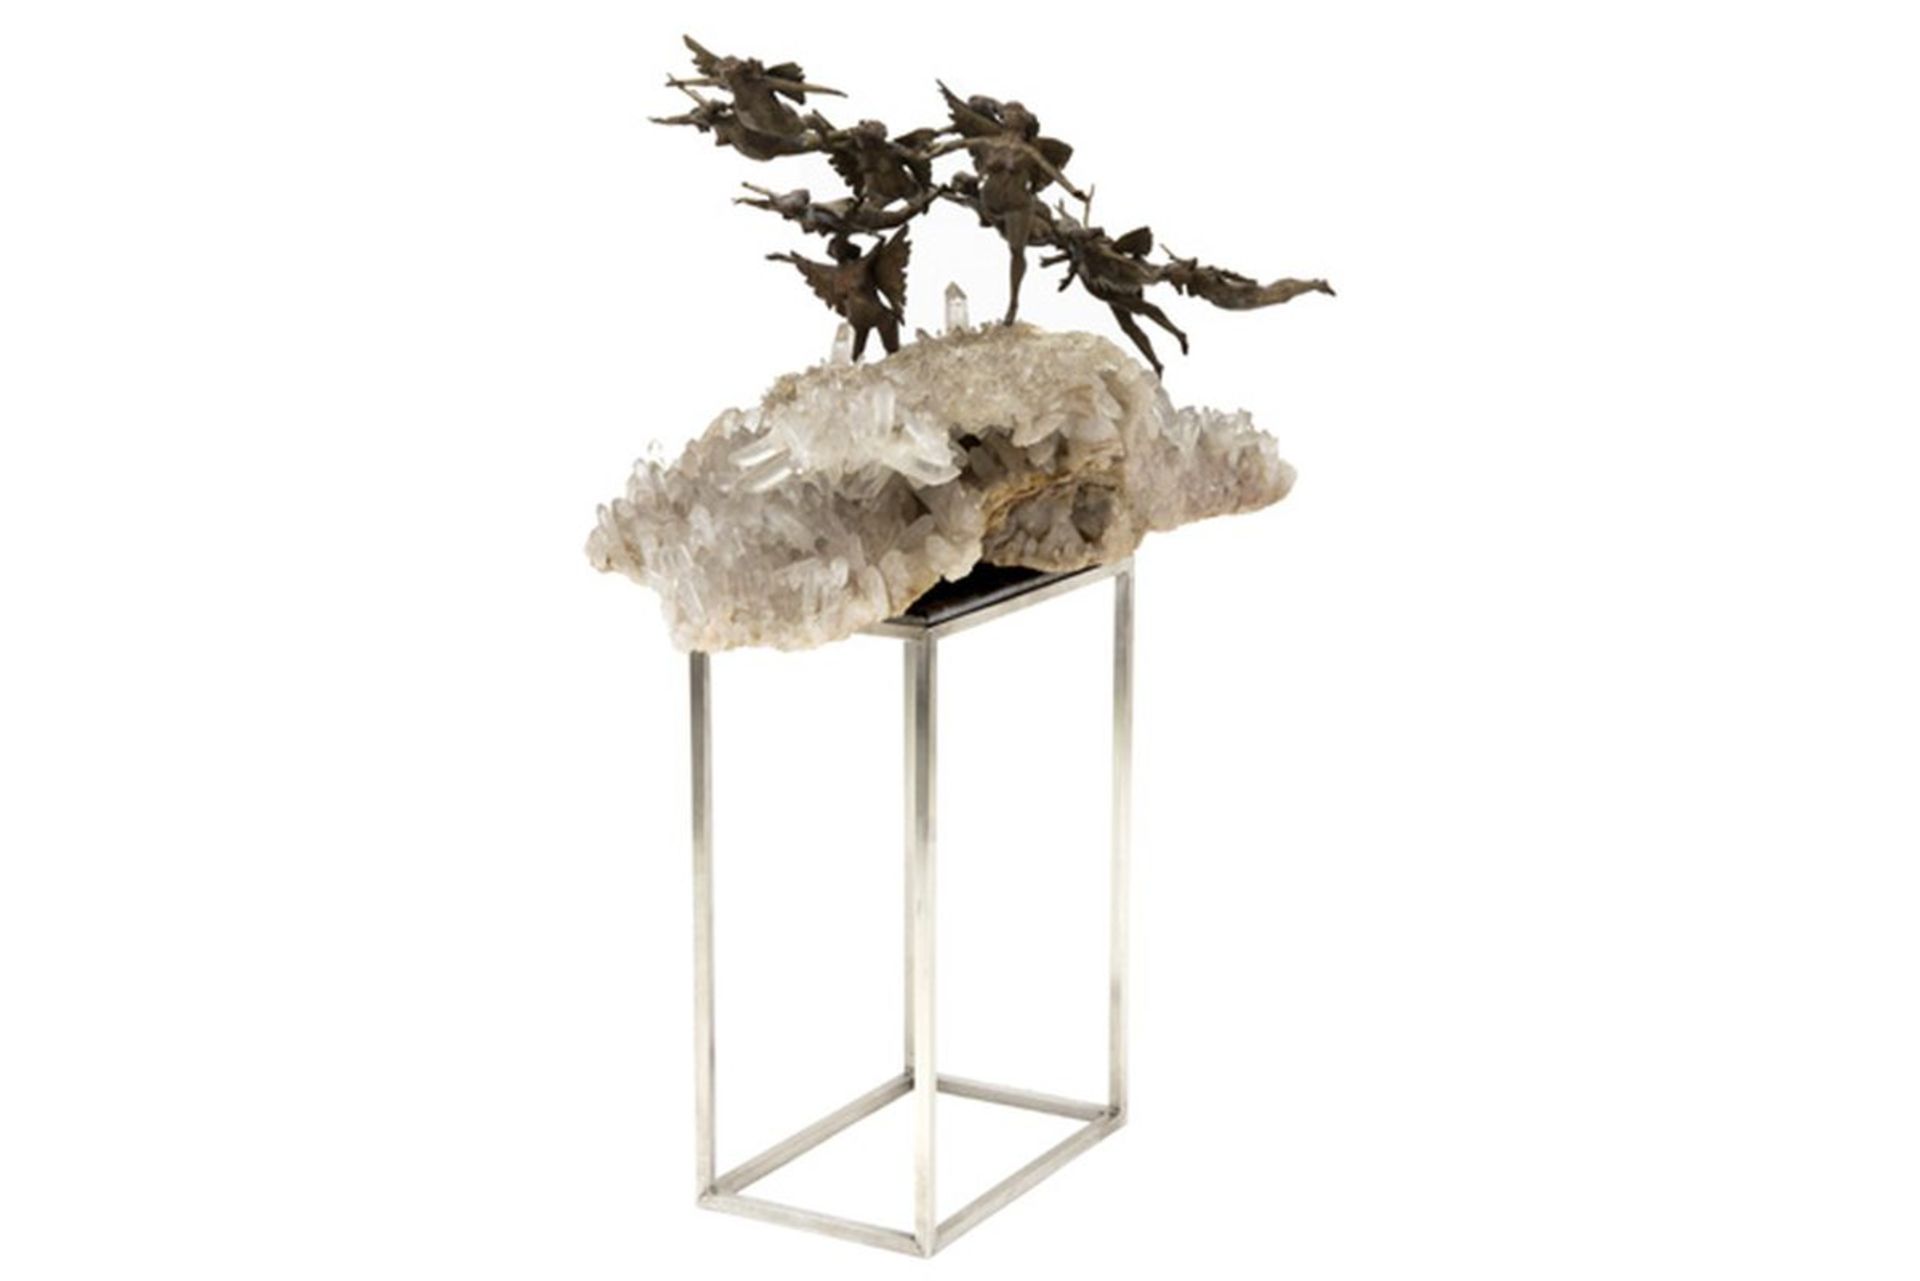 20th Cent. Belgian sculpture in bronze on a big crystalgeode - signed - - [...] - Image 3 of 4